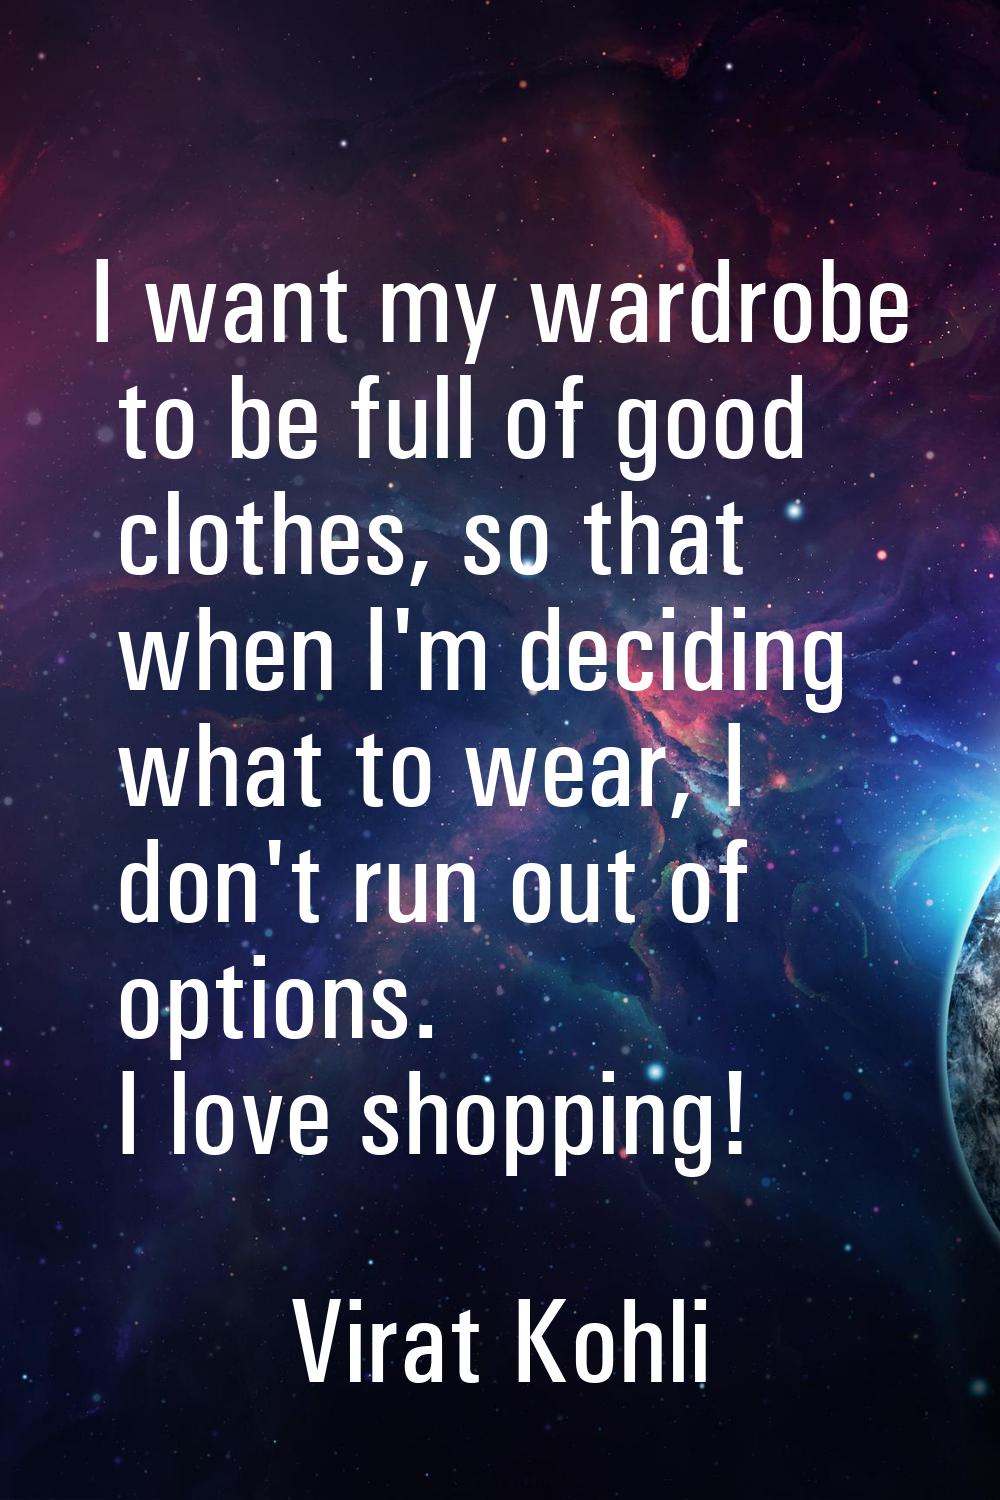 I want my wardrobe to be full of good clothes, so that when I'm deciding what to wear, I don't run 